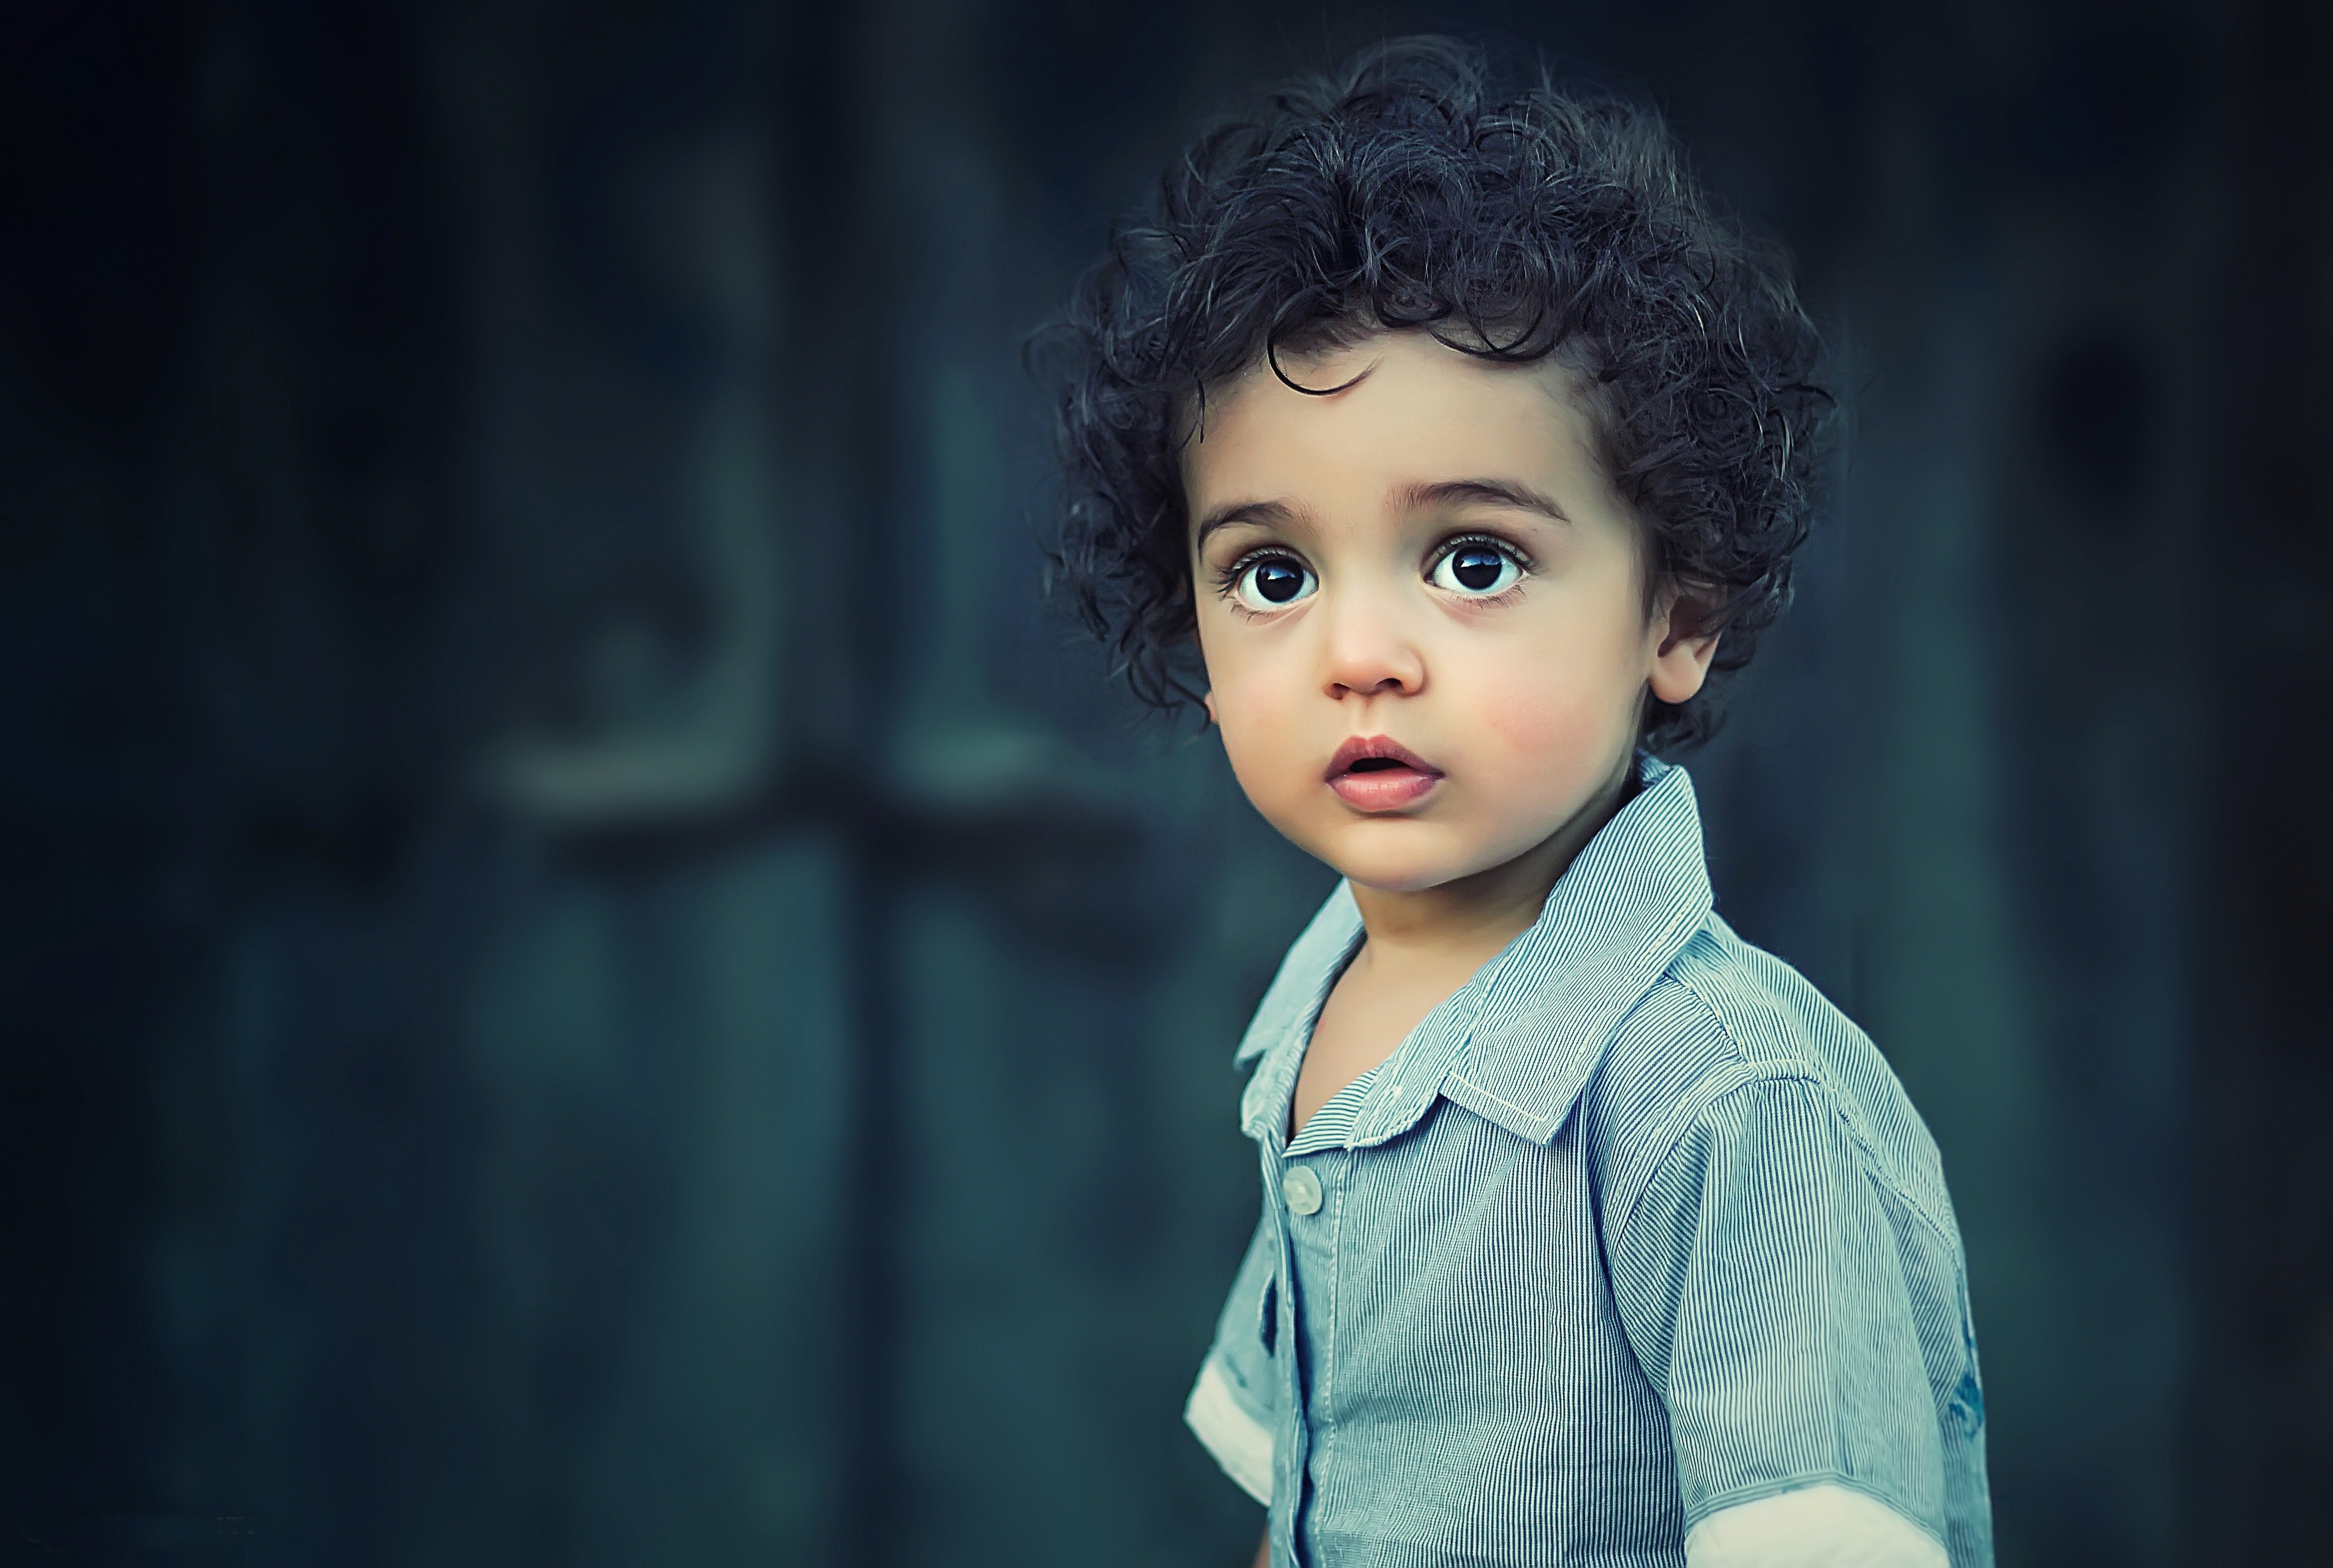 A boy with beautiful eyes. | Source: Pexels